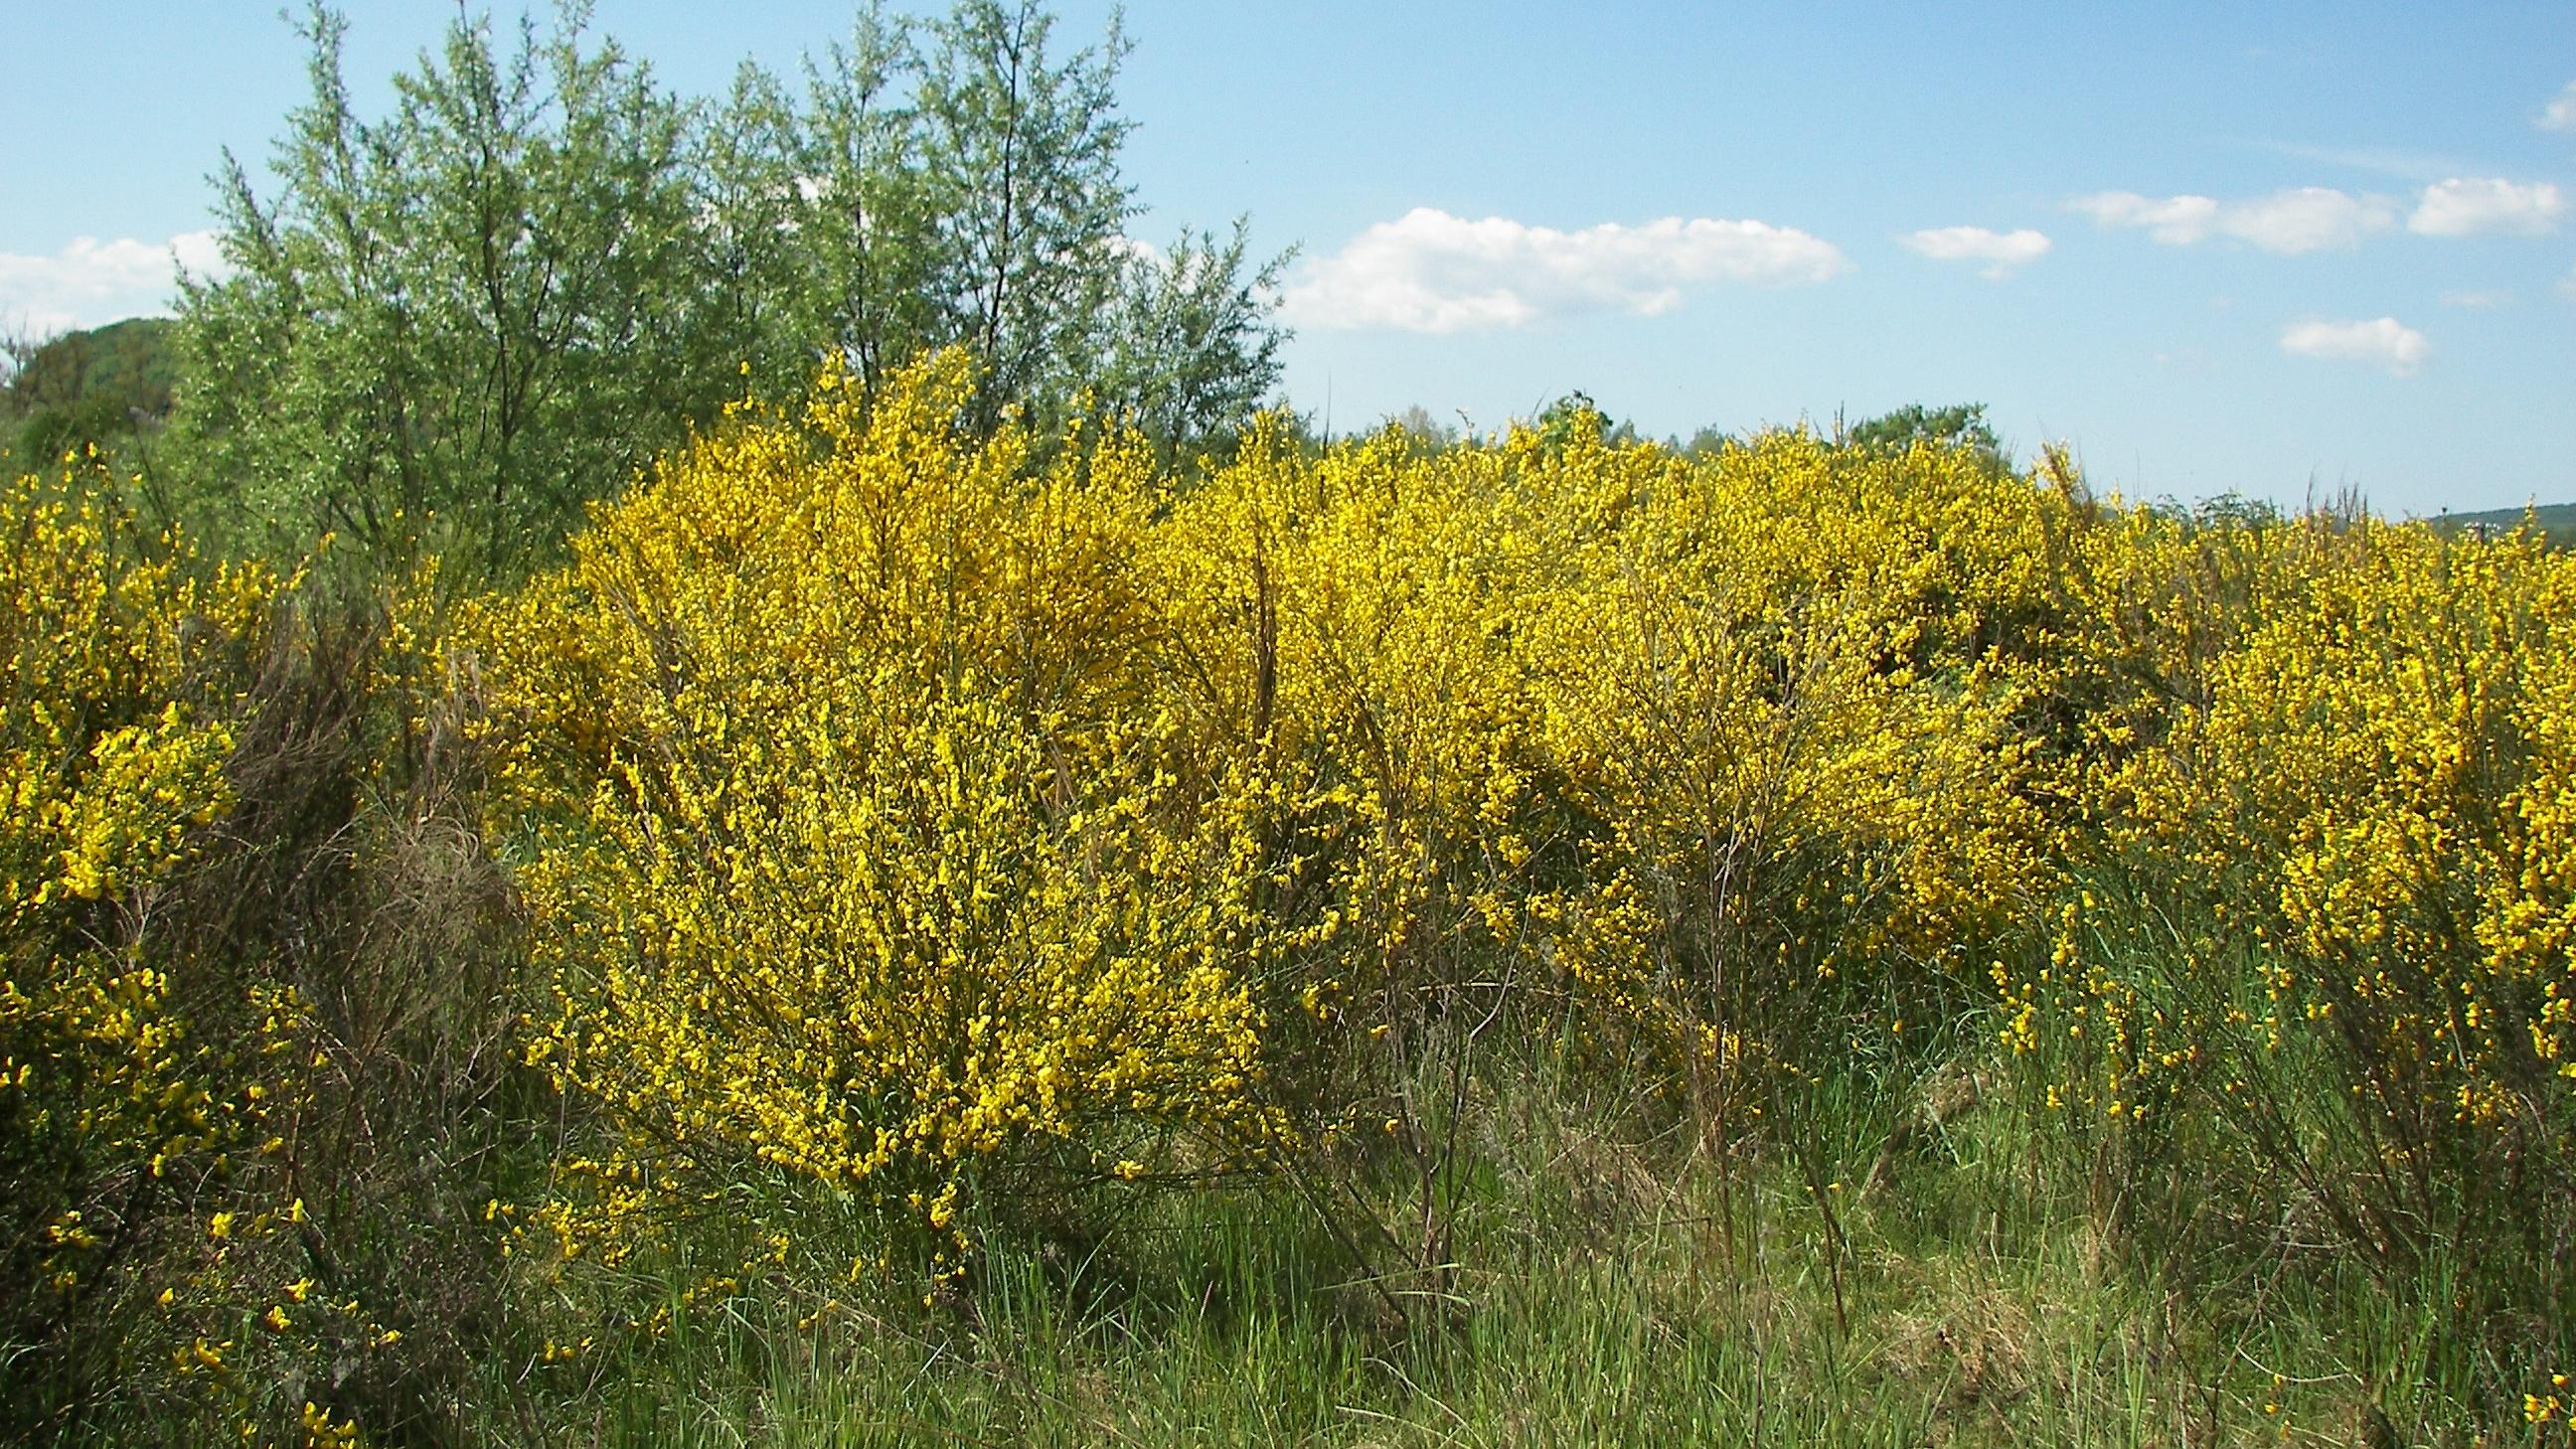 Scotch broom currently infests millions of acres throughout California. Photo: UC ANR